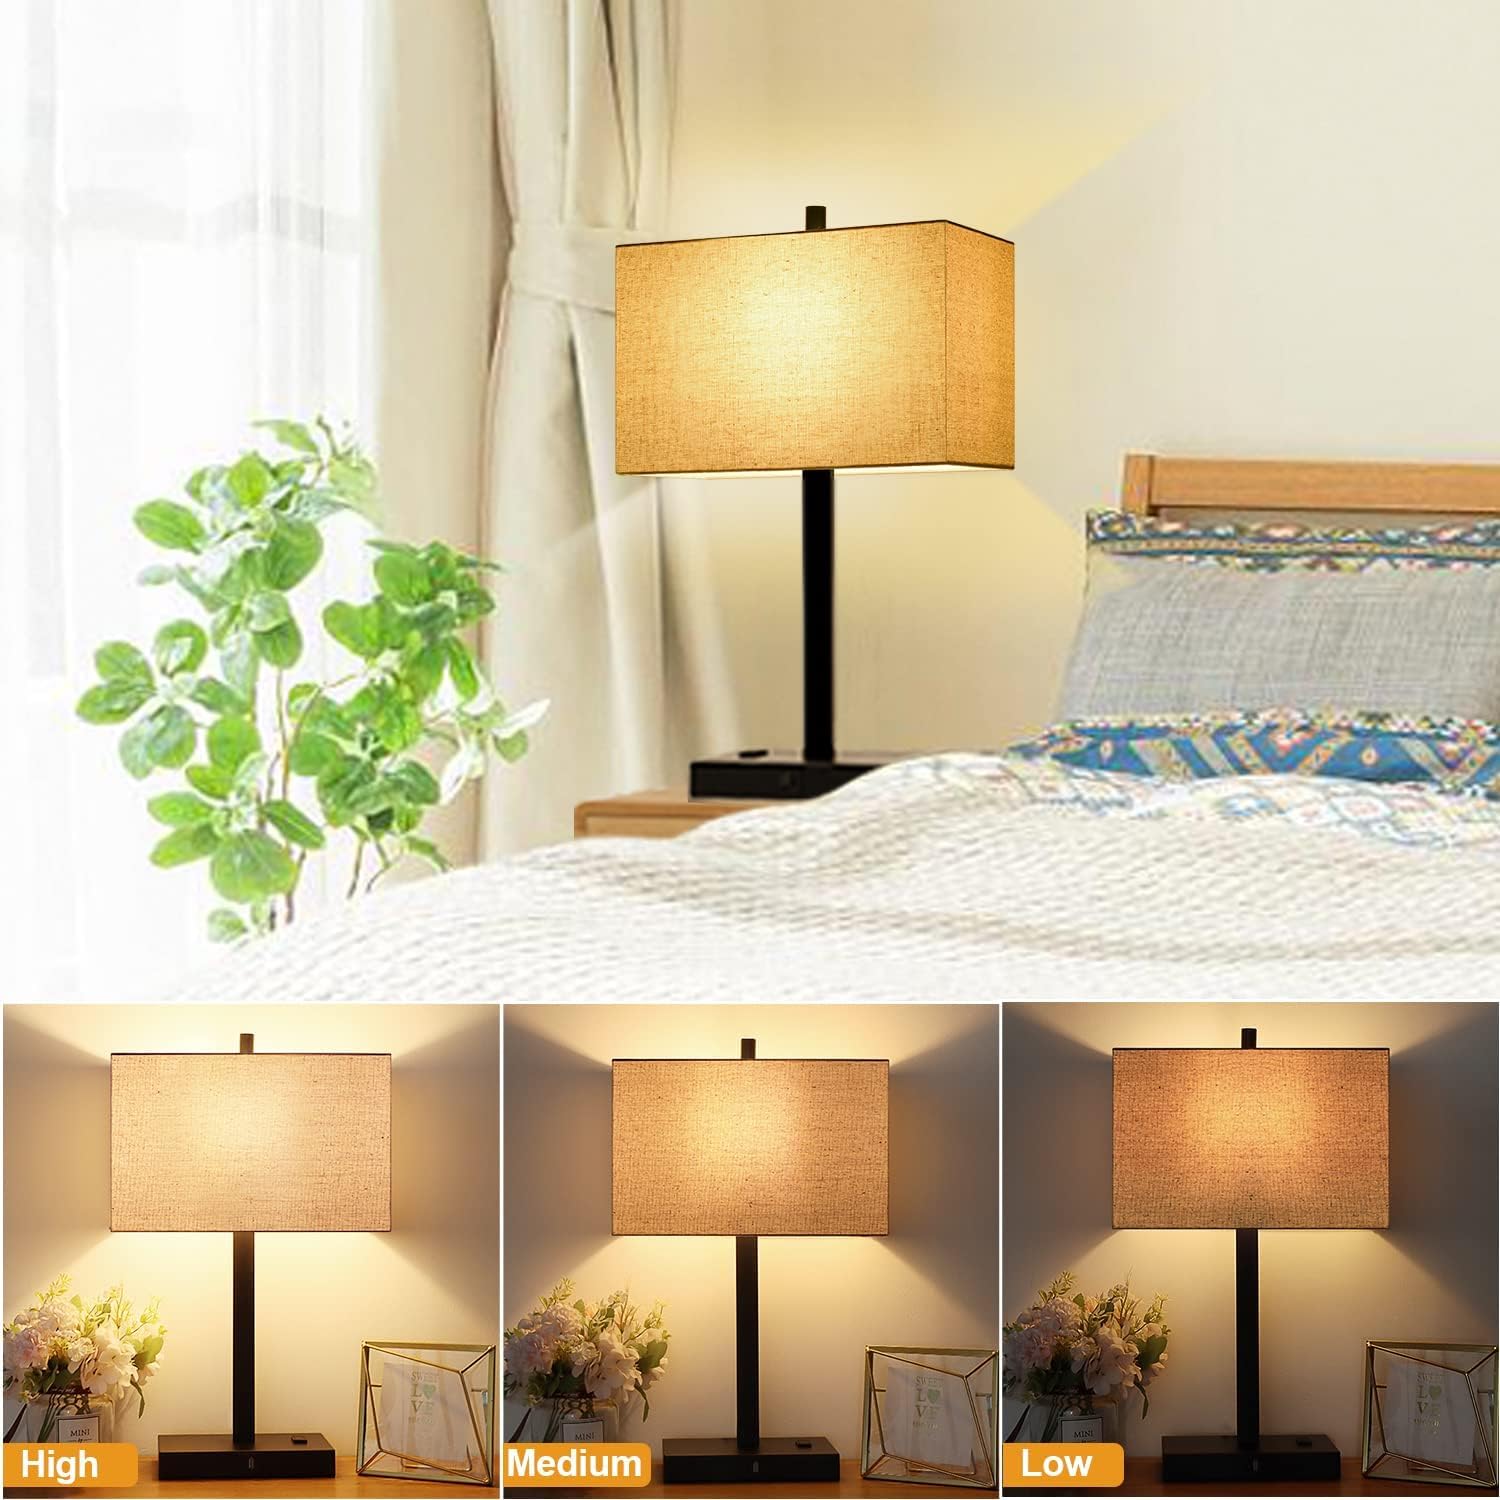 【Upgraded】Set of 2 Bedside Touch Control Table Lamp with USB A+C Charging Ports & AC Outlet, 3-Way Dimmable Nightstand Lamp with Fabric Shade for Bedroom Living Room, 2700K LED Bulbs Included